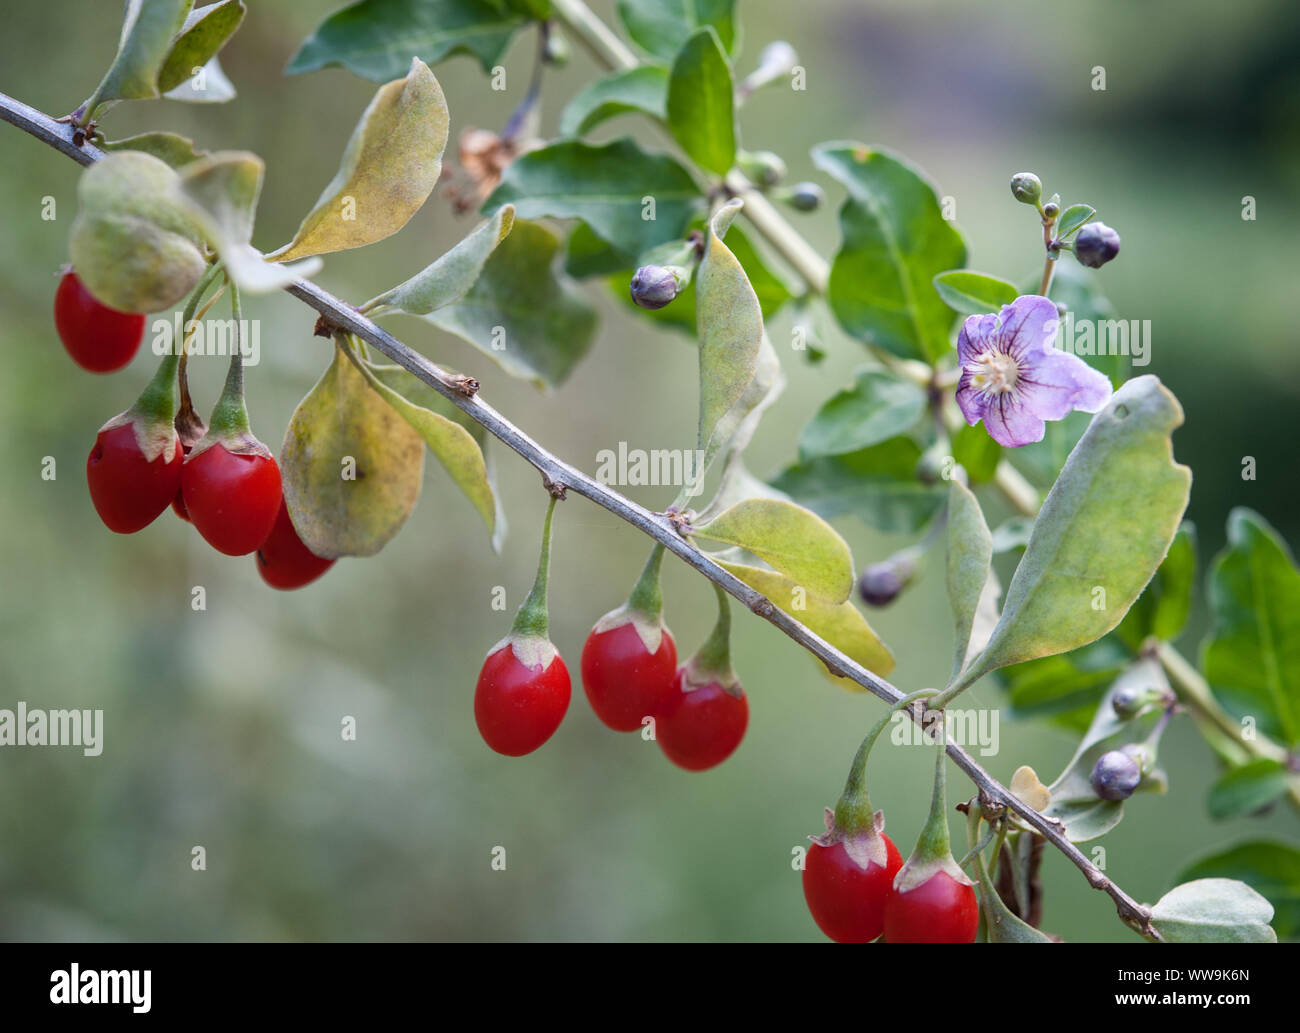 Lycium barbarum plant. Goji berry and derived products became common in developed countries as health foods or alternative medicine remedies. Stock Photo